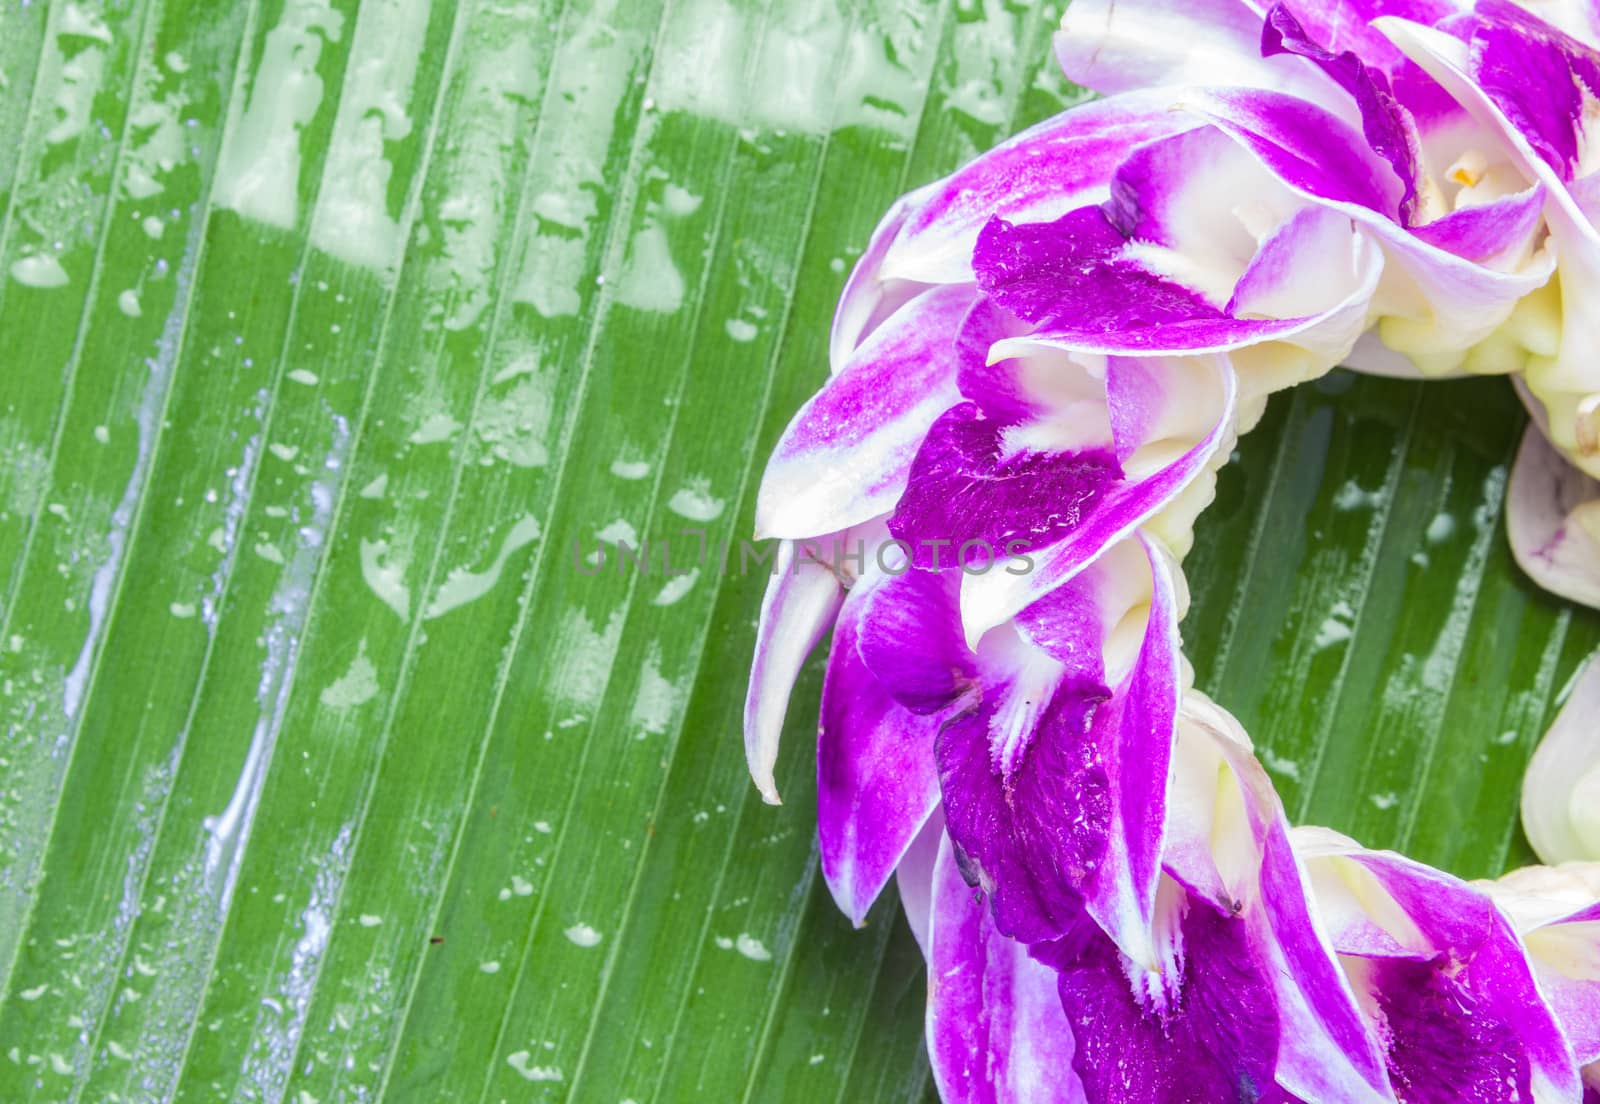 Orchid garland on a banana leaf